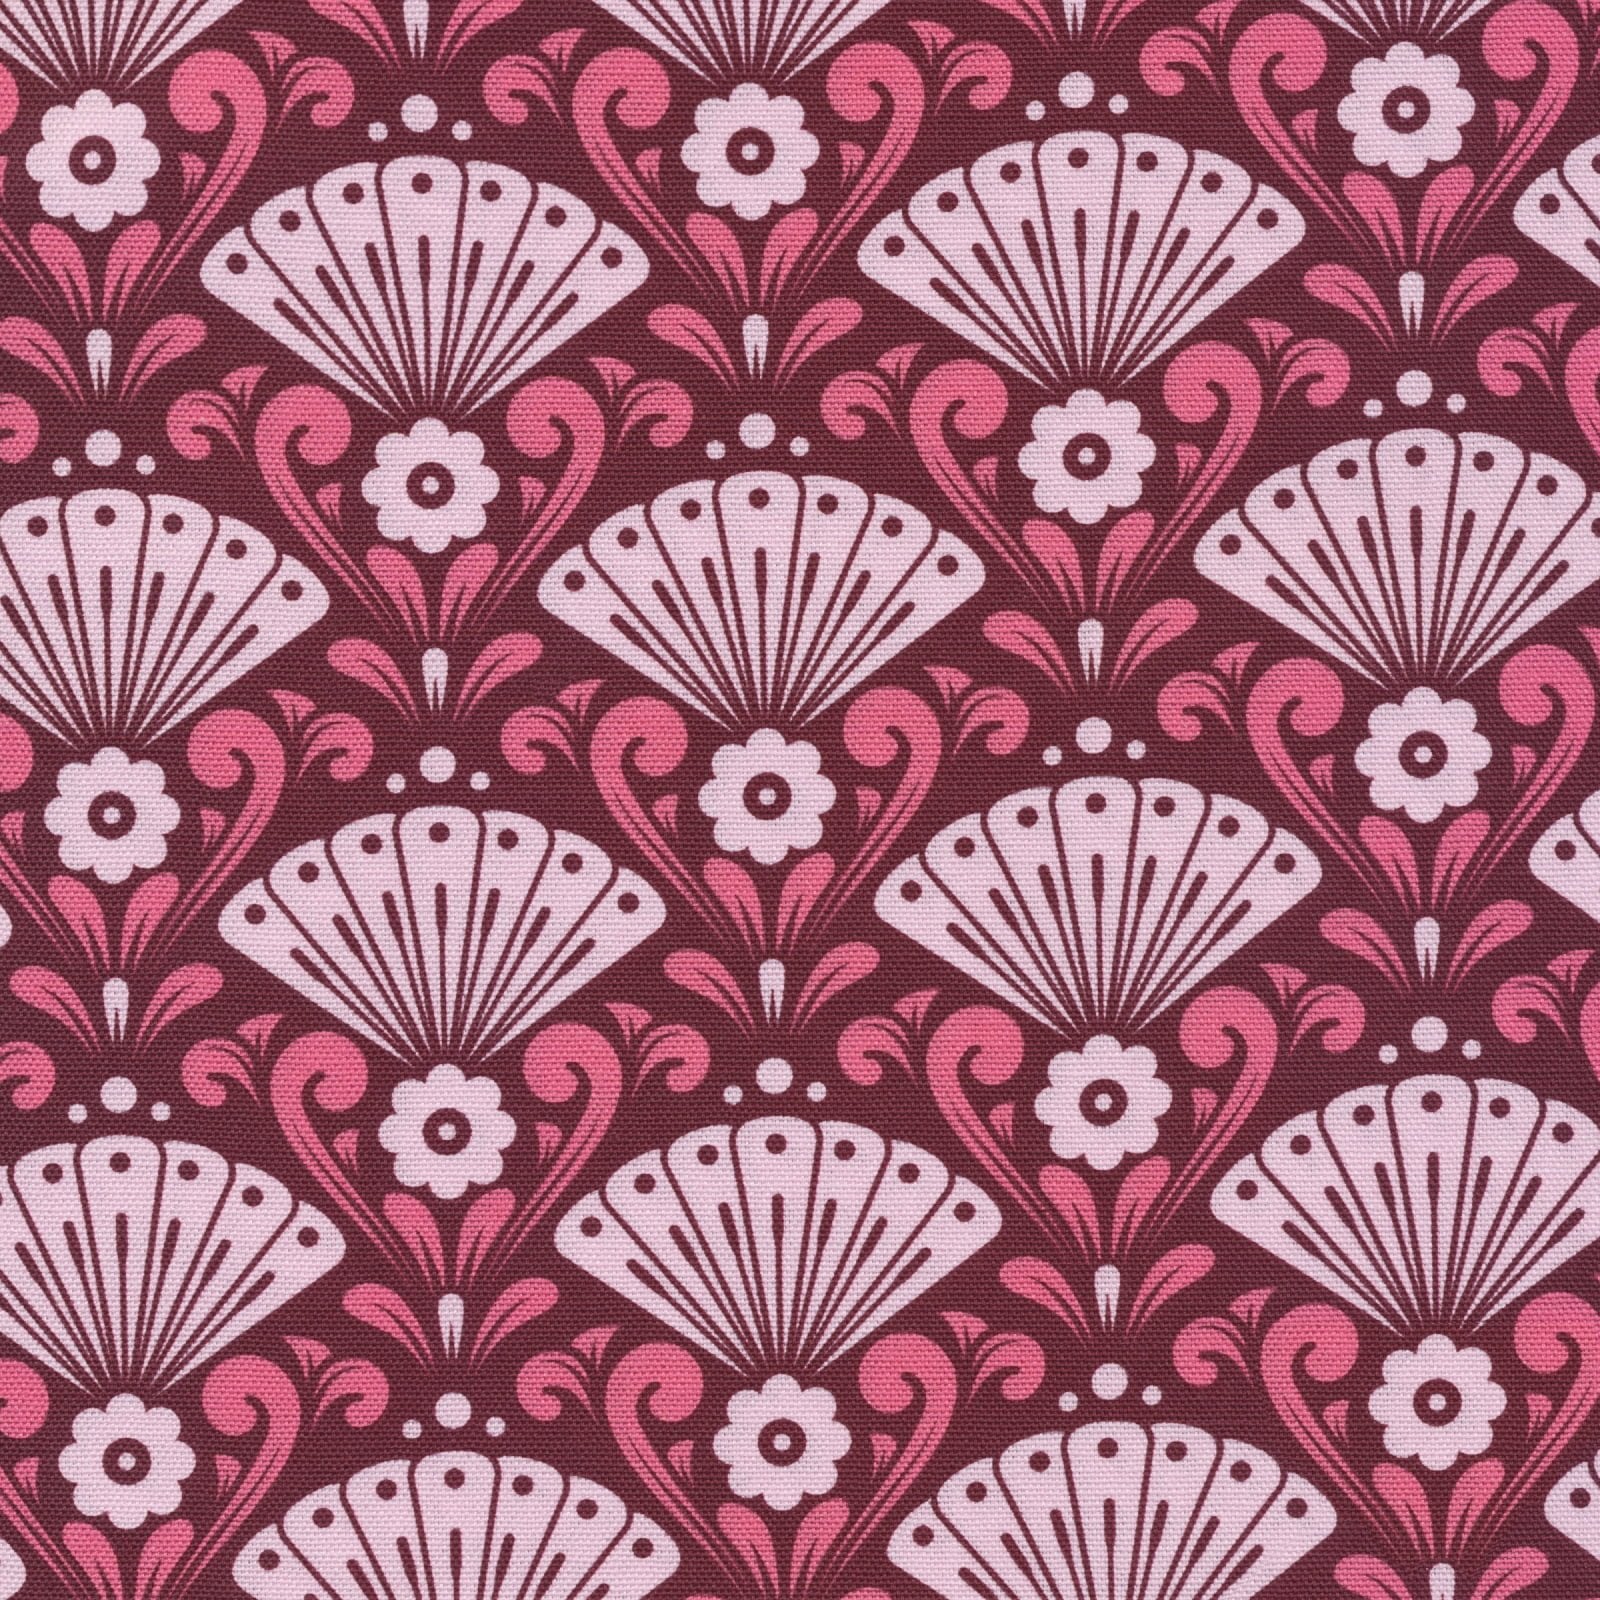 floral fan shapes in pink and purple